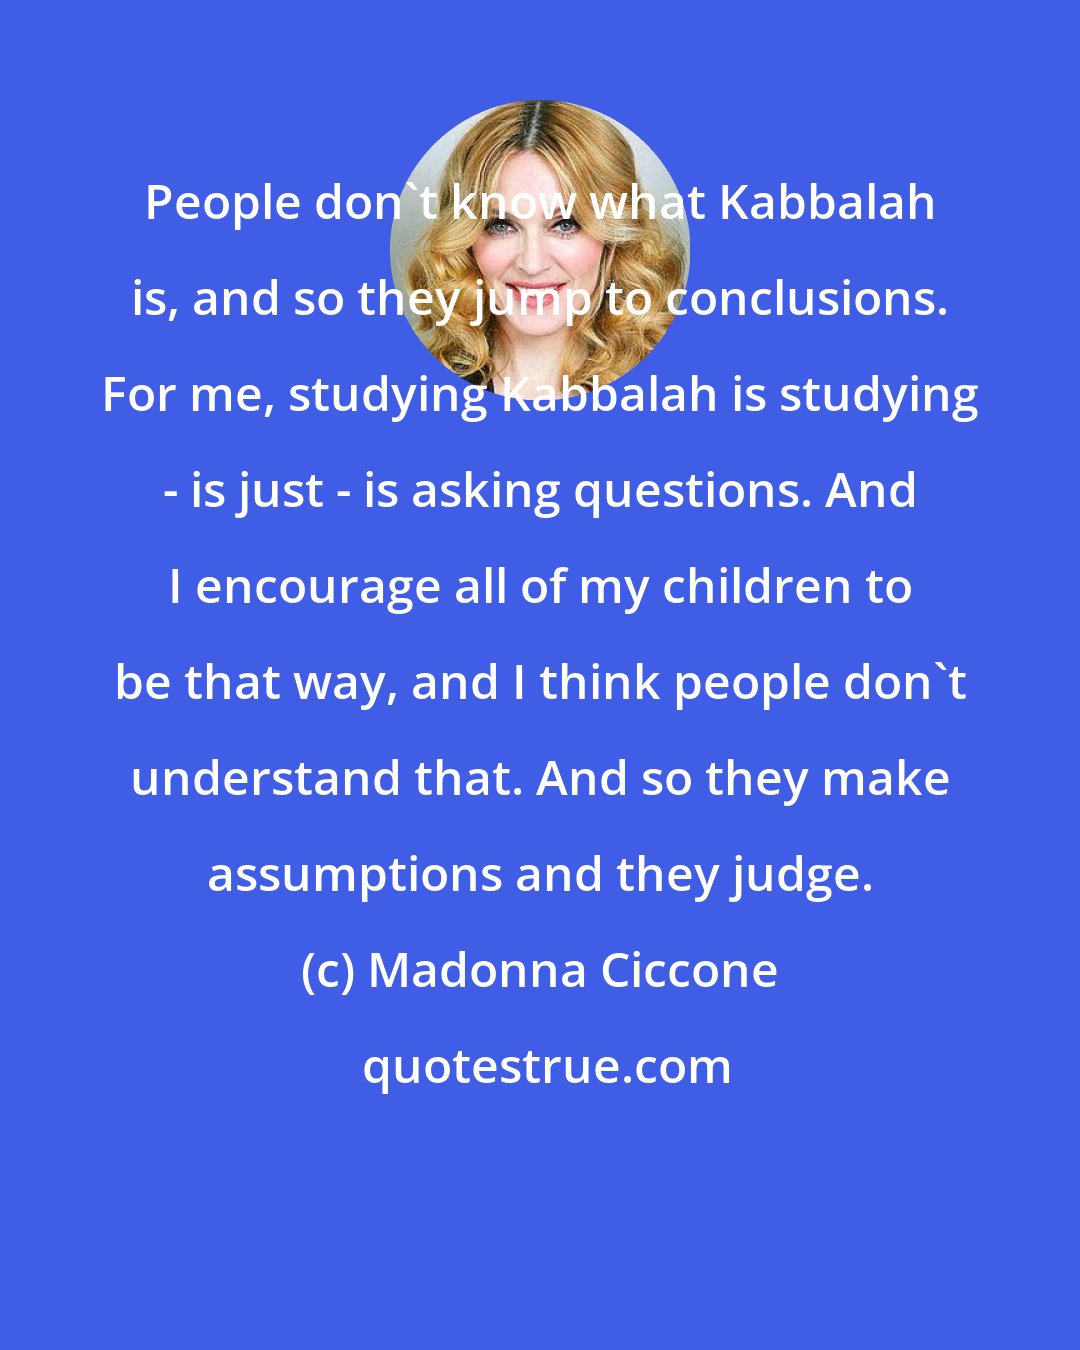 Madonna Ciccone: People don't know what Kabbalah is, and so they jump to conclusions. For me, studying Kabbalah is studying - is just - is asking questions. And I encourage all of my children to be that way, and I think people don't understand that. And so they make assumptions and they judge.